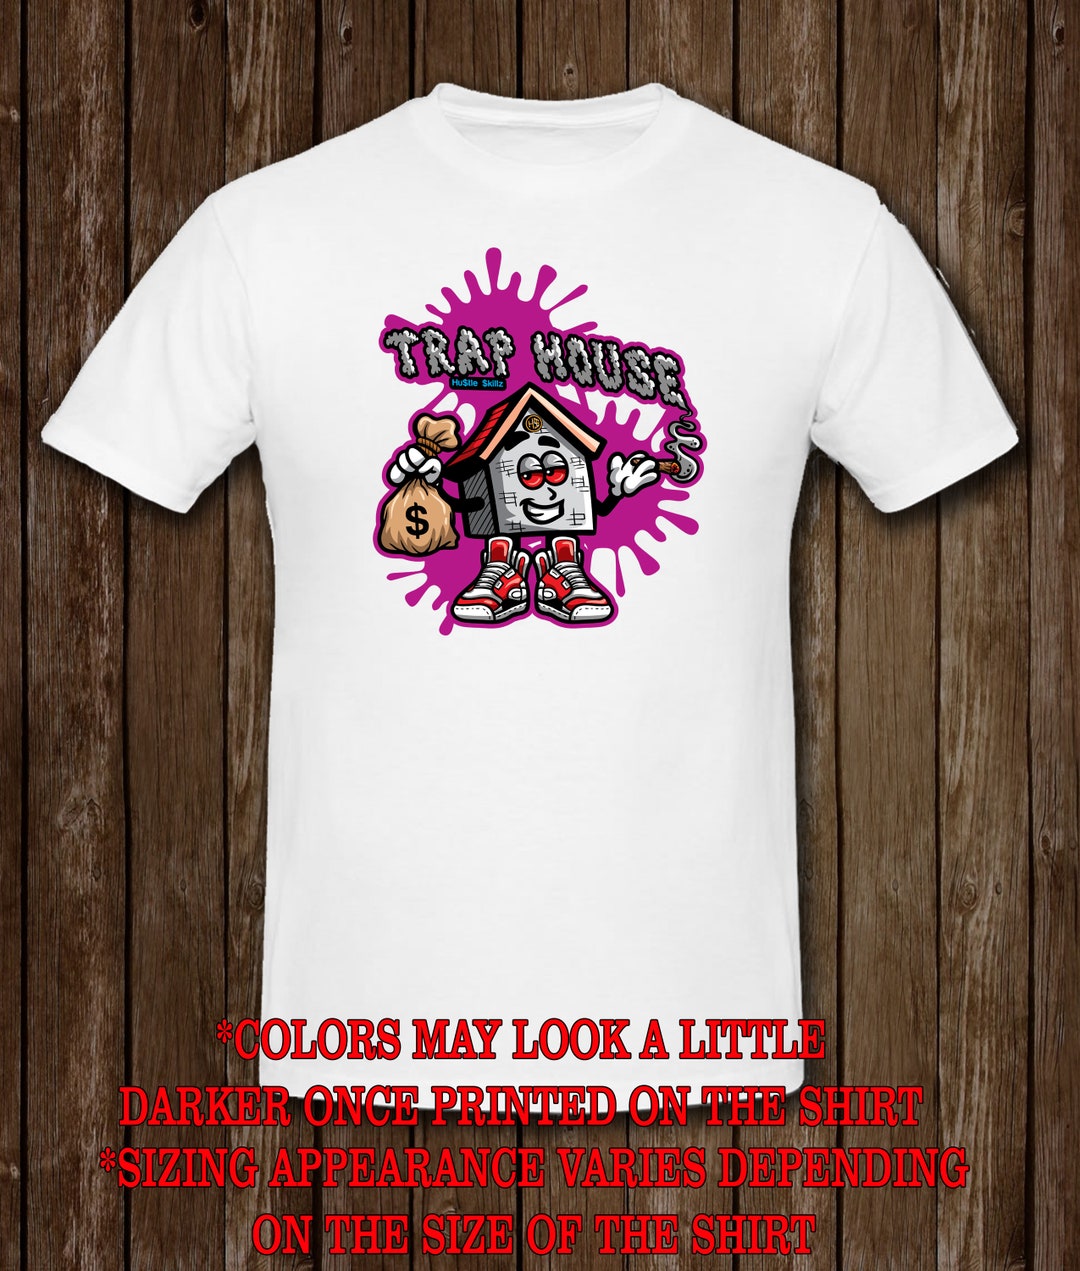 TRAP HOUSE - Graphic T-Shirt, Funny Parody Tee, Quirky Gift, DTG Printed T  Shirt